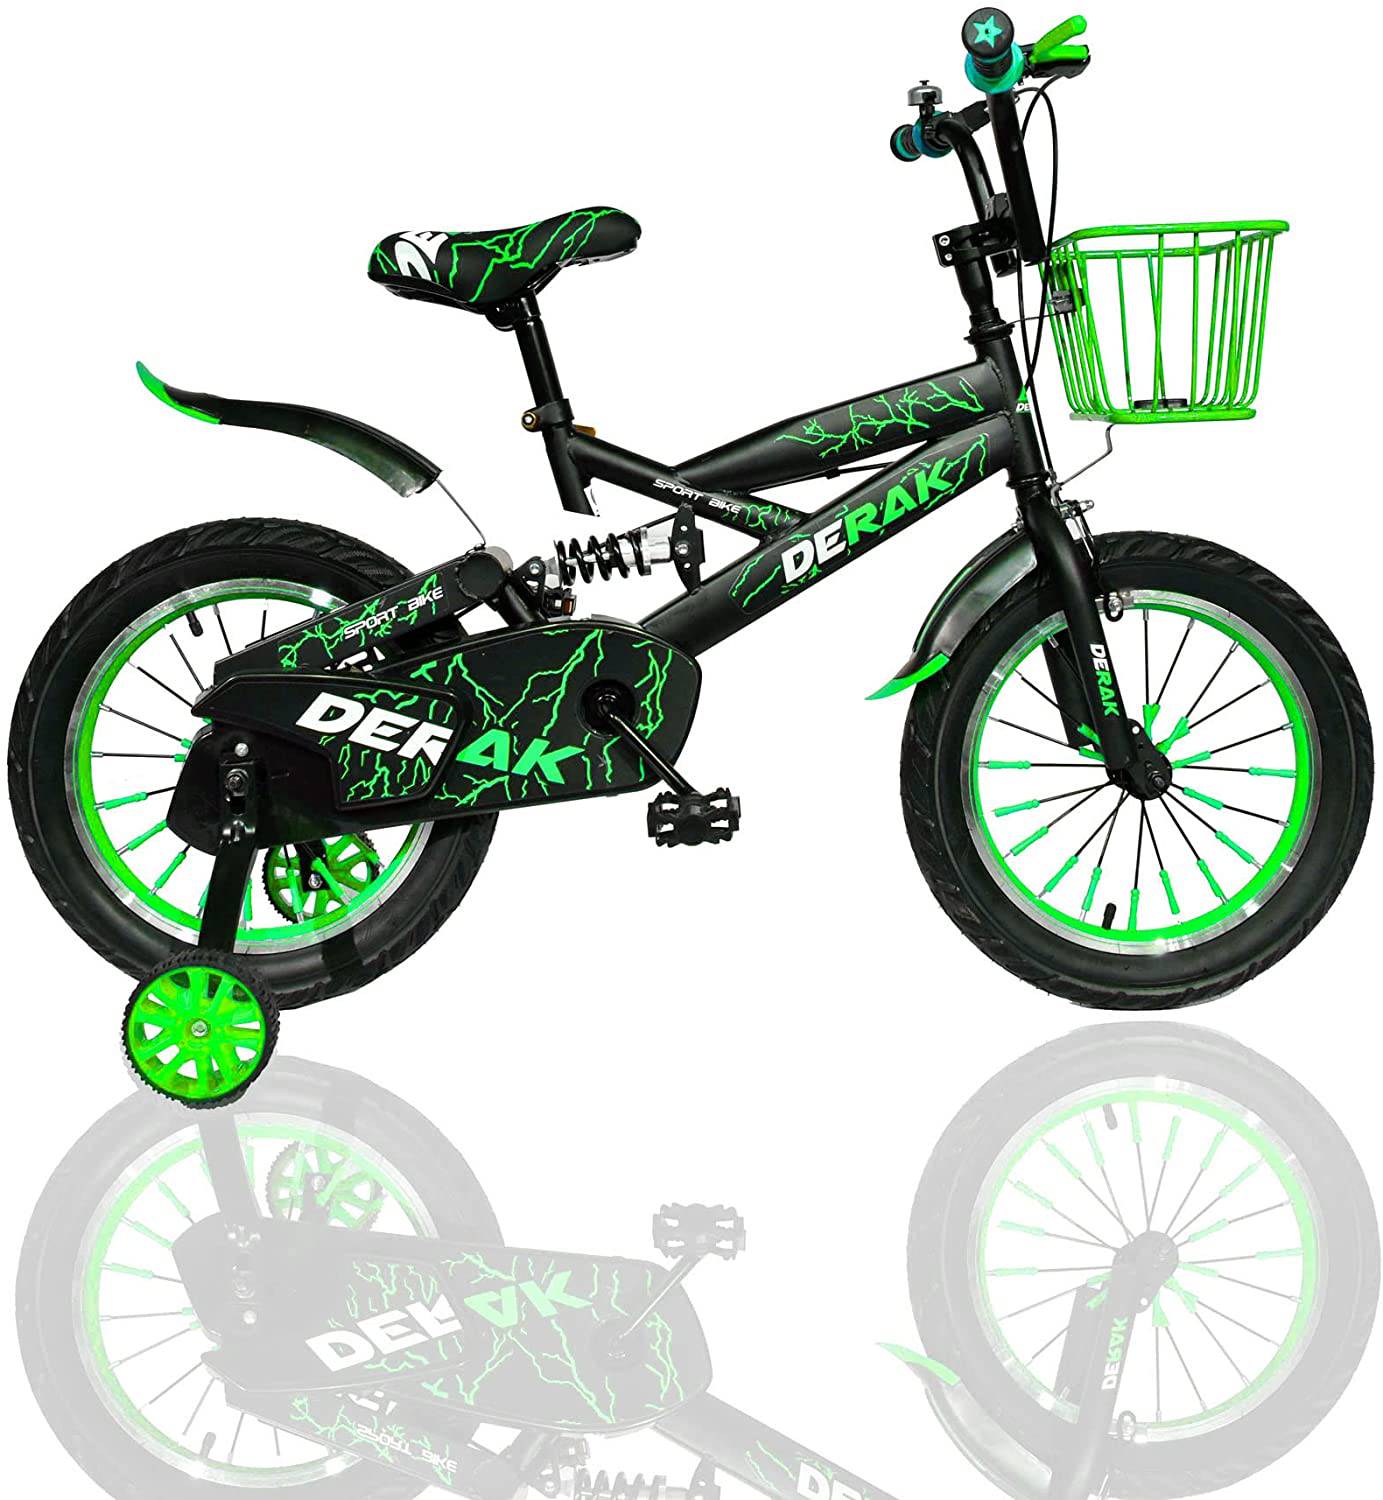 Kids Bicycle 12 Inch Step Up Mountain Green - DerakBikes